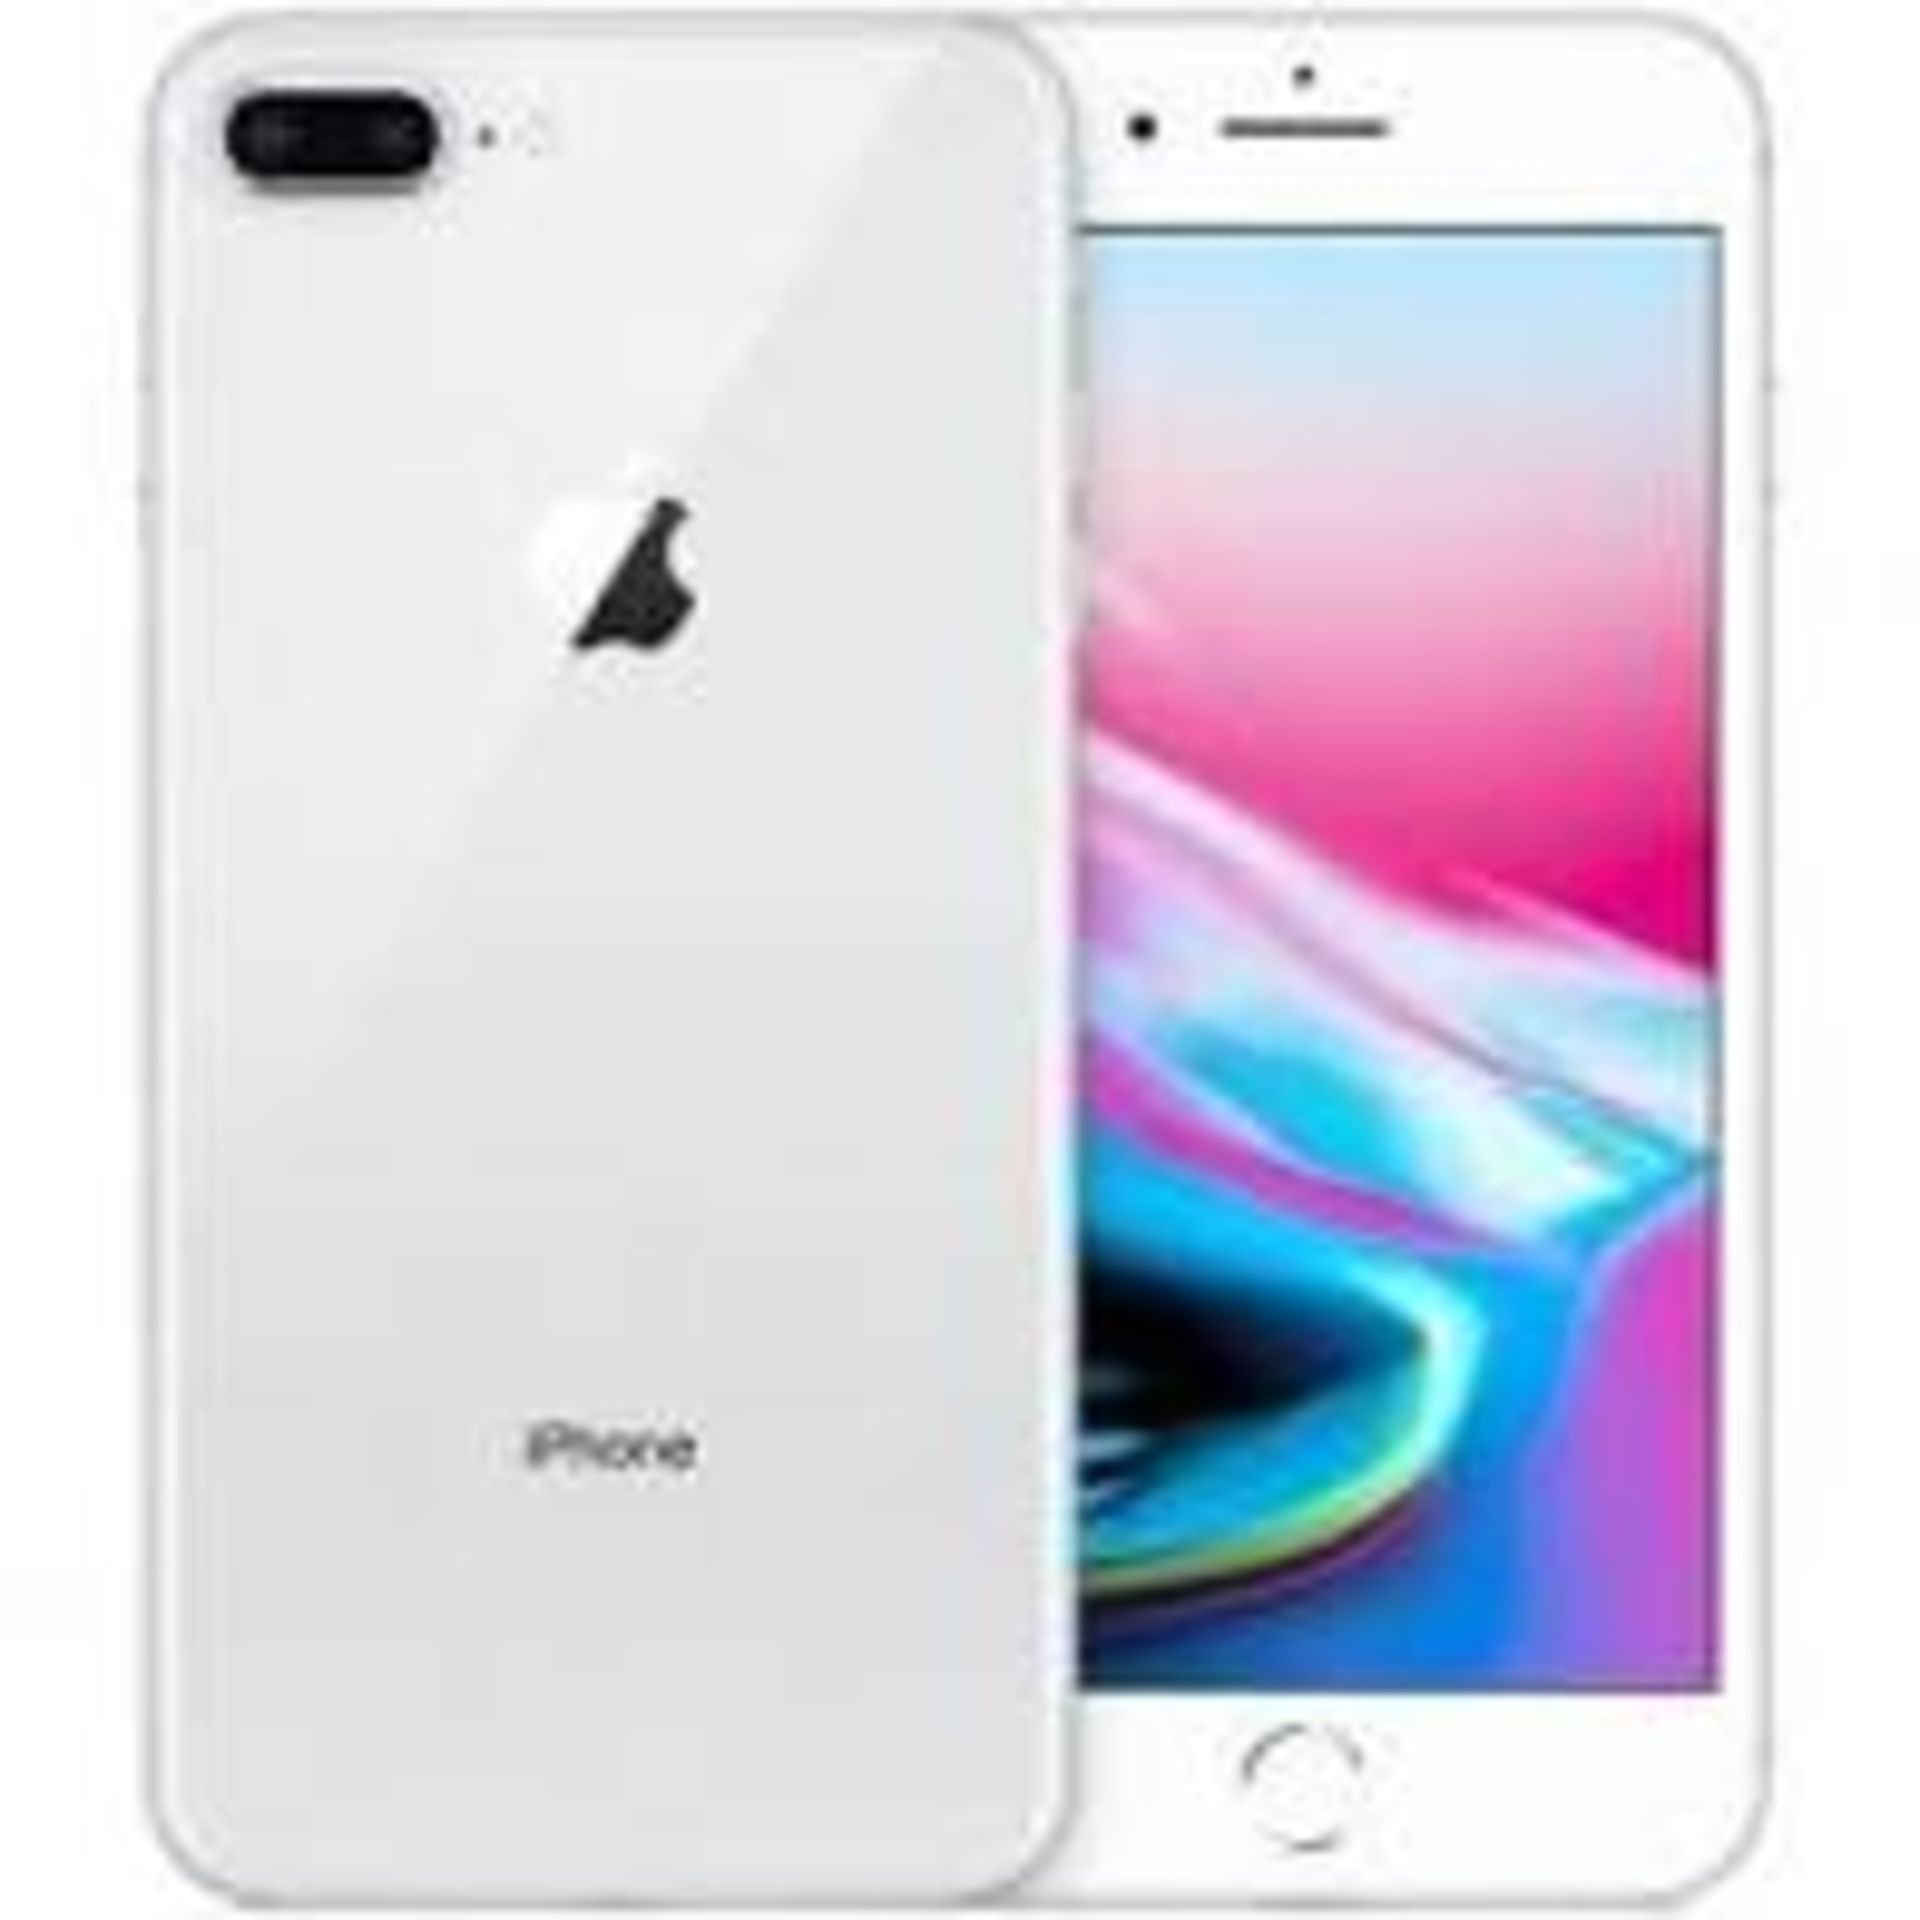 Apple iPhone 8+ 64GB Silver. £580 - Grade A - Perfect Working Condition - (Fully refurbished and